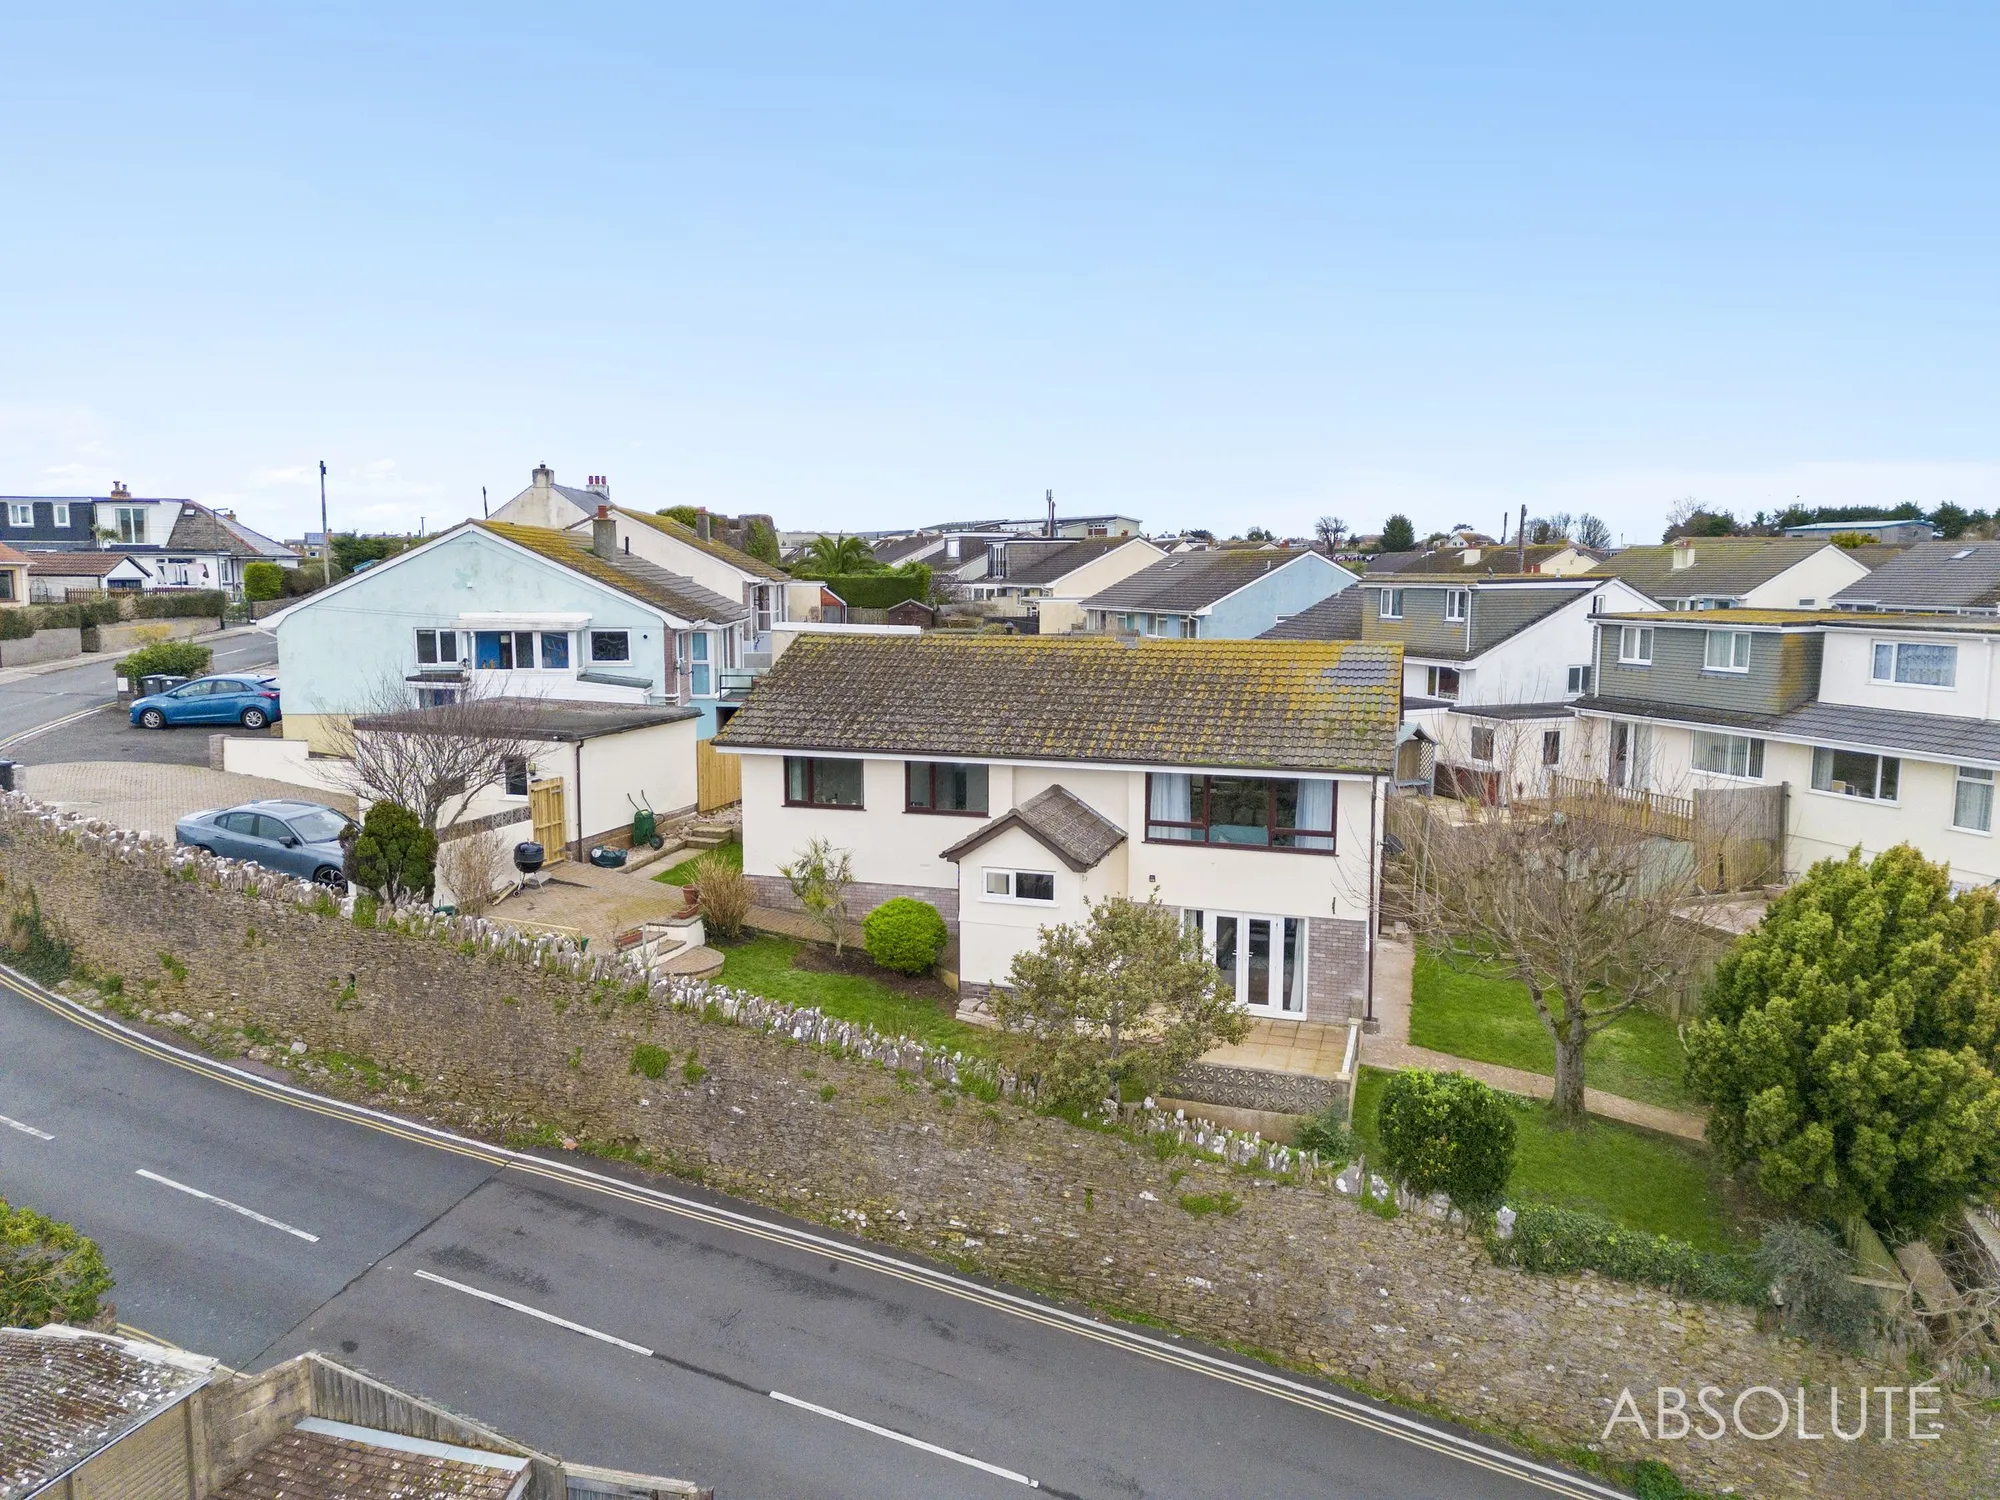 4 bed detached house for sale in Windmill Hill, Brixham - Property Image 1